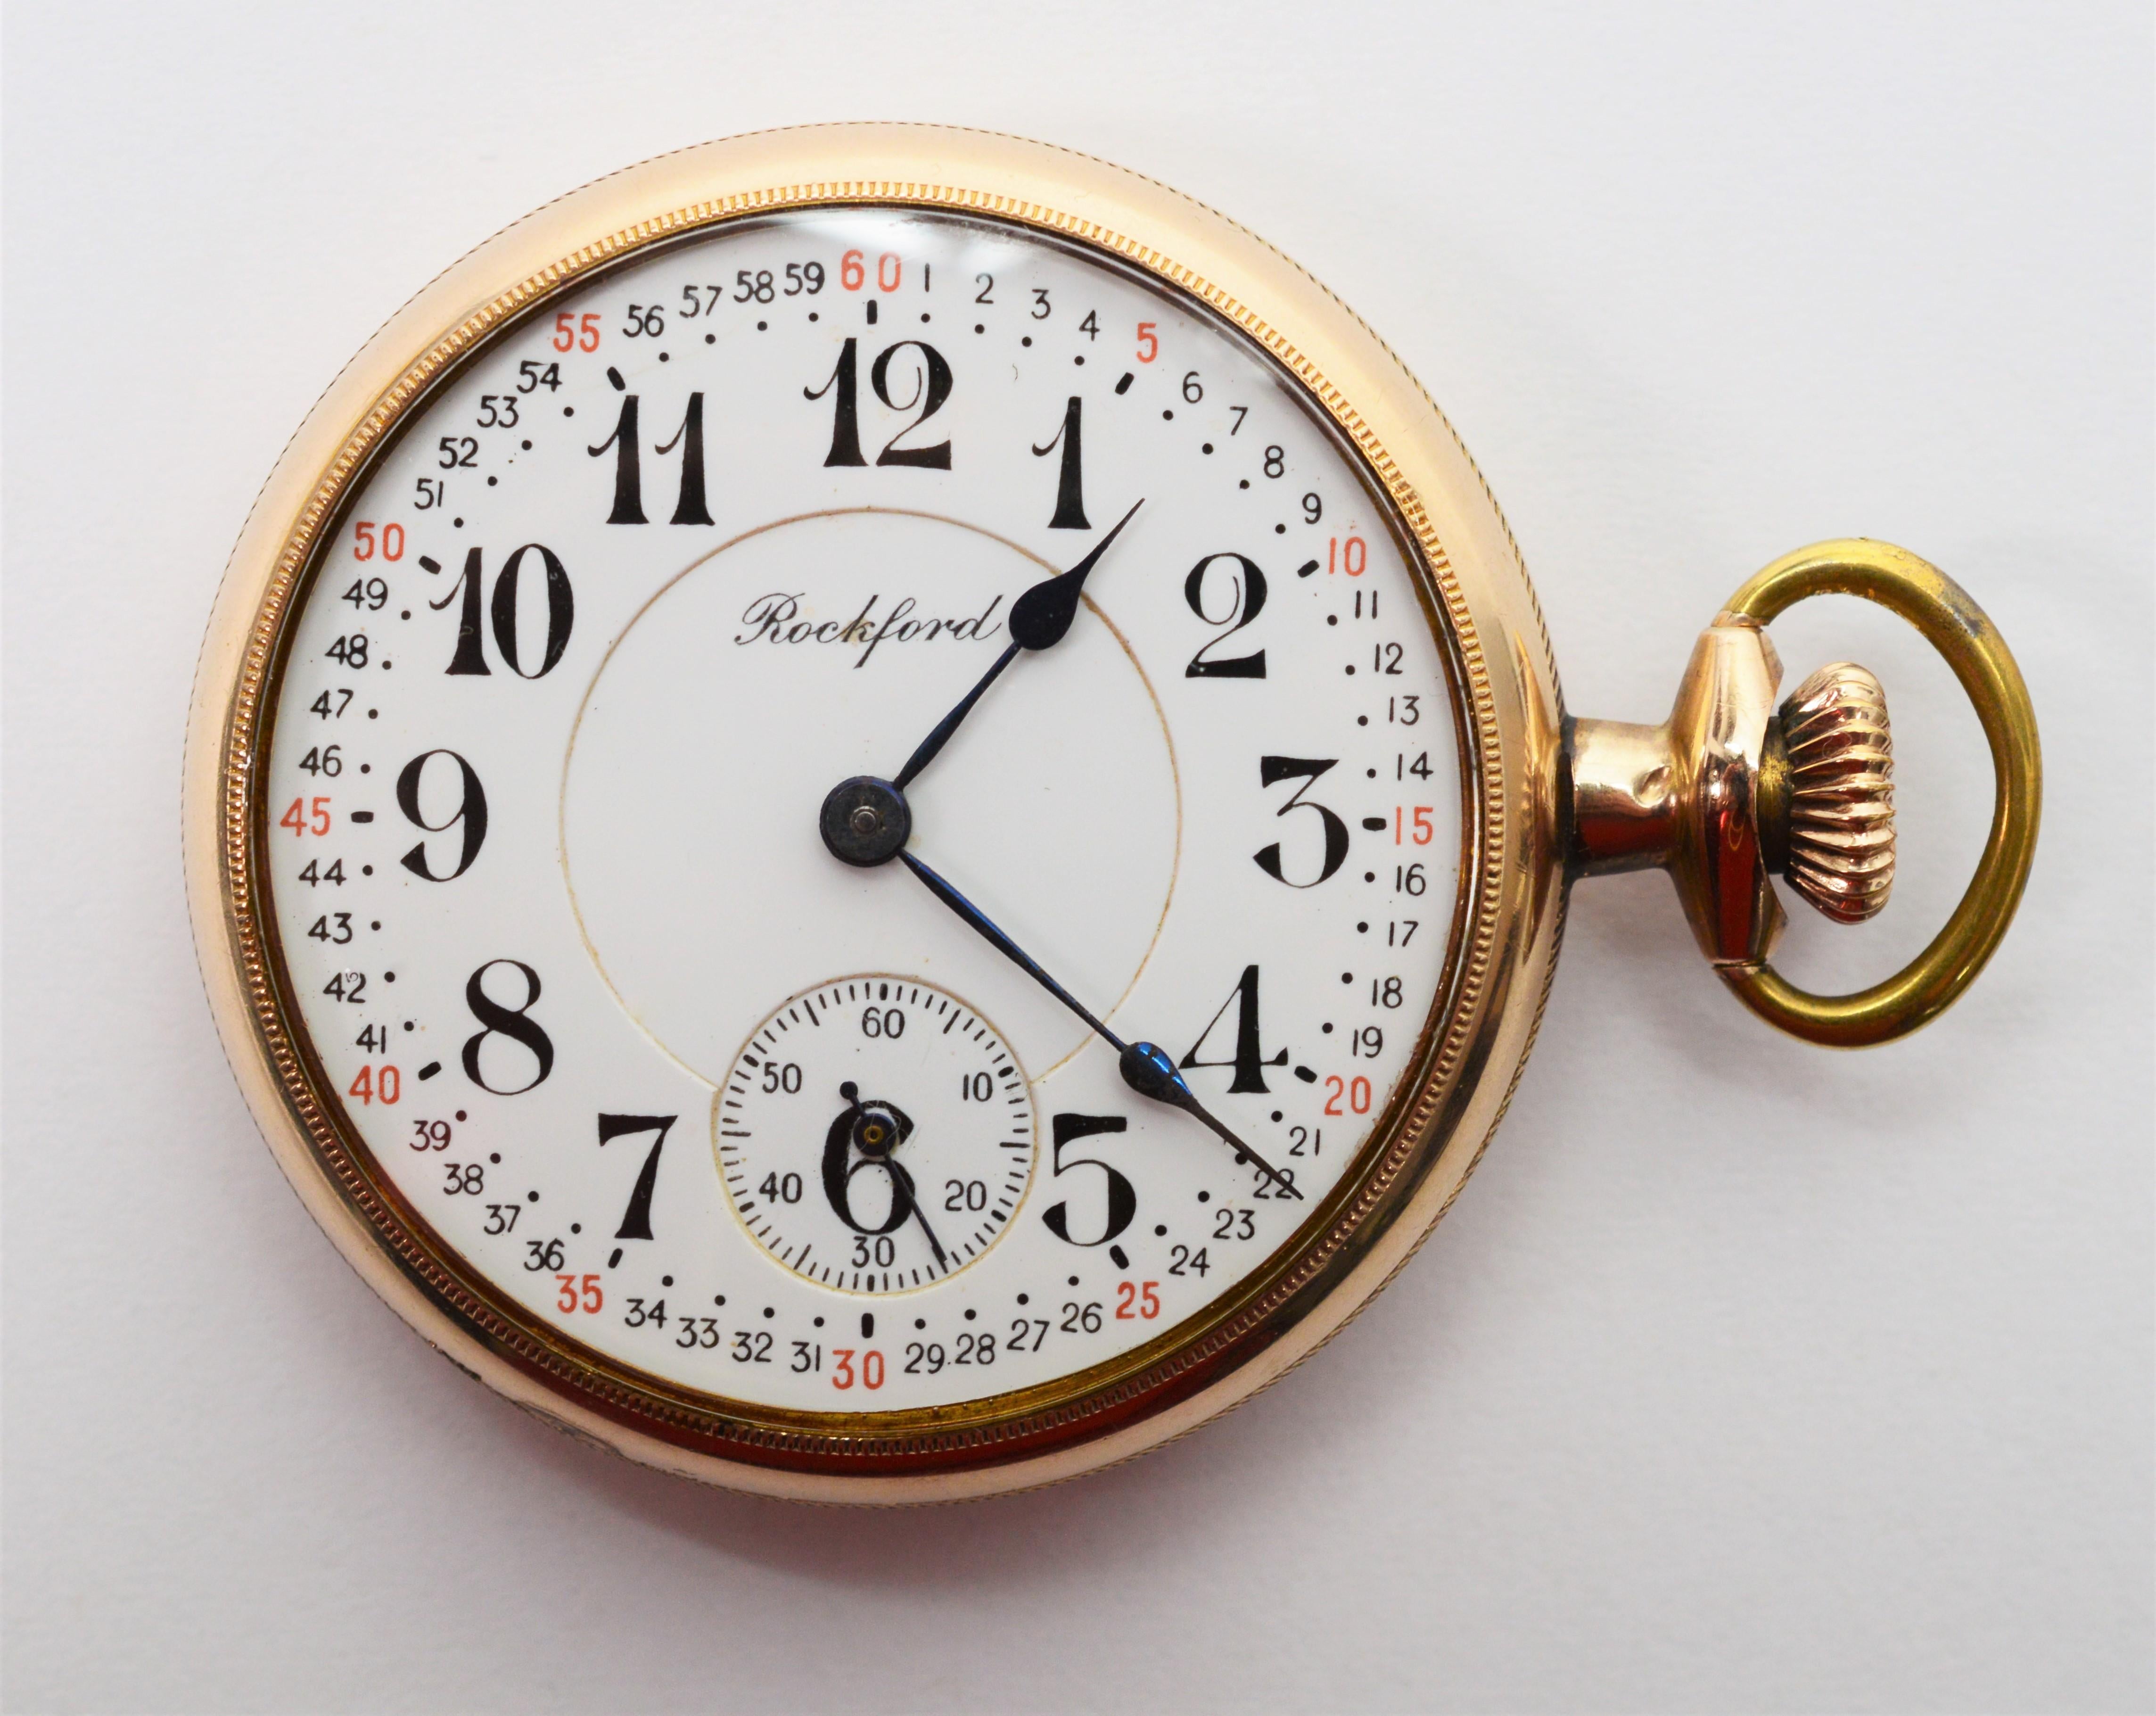 Men's Rockford Watch Co. Railroad Style Pocket Watch with Skeleton Display Back